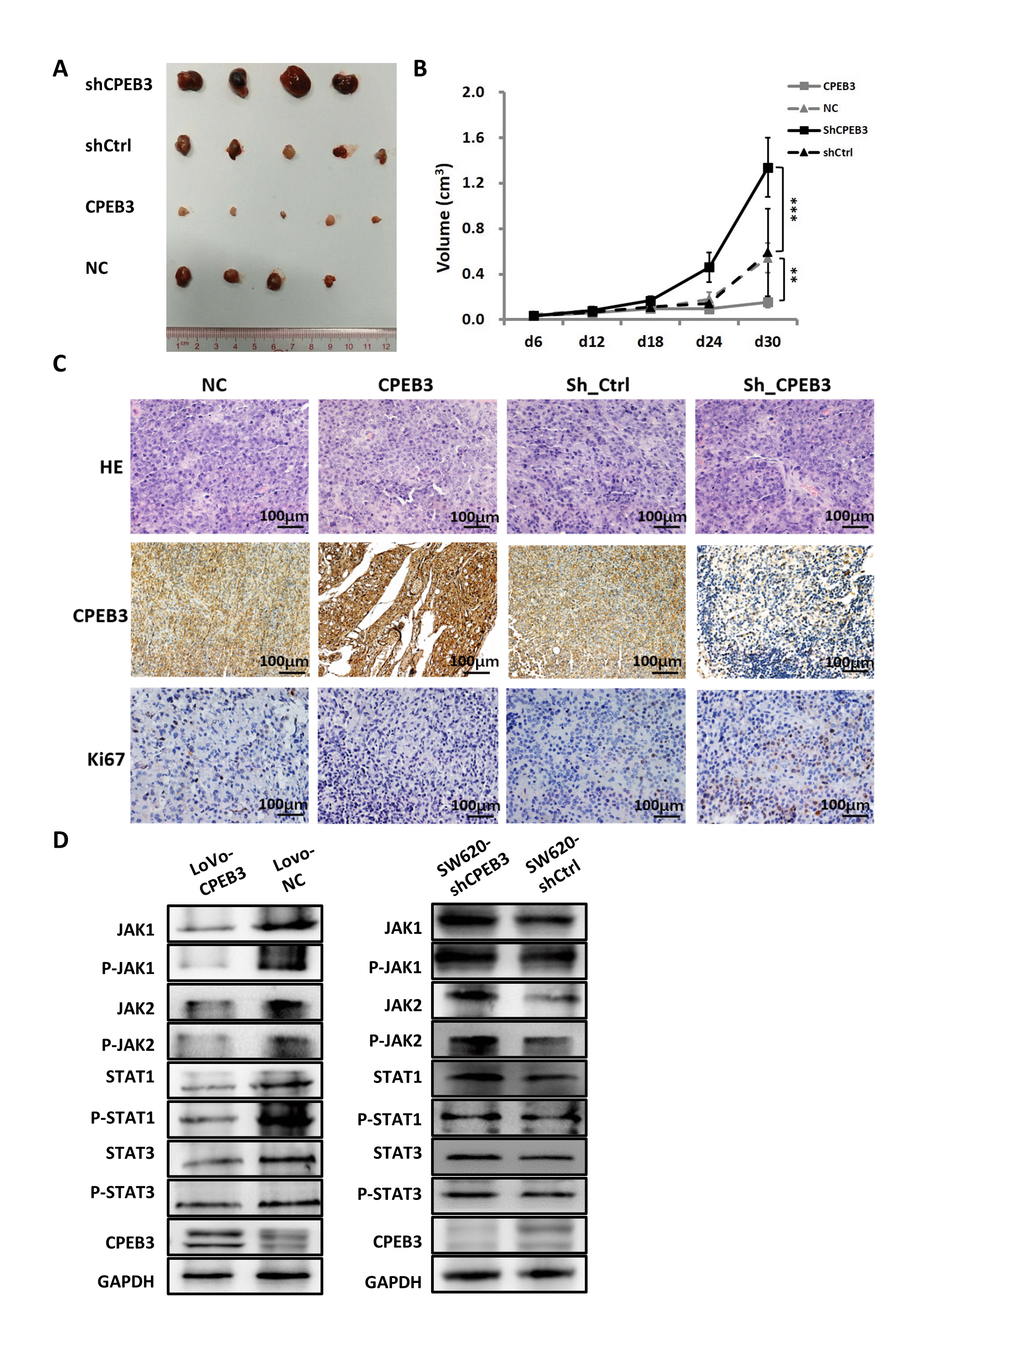 CPEB3 inhibits human colorectal cancer proliferation and JAK/STAT pathway in vivo. (A) Representative images of tumors formed in nude mice subcutaneously implanted with SW480-CPEB3, SW-NC, SW480-shCPEB3 and SW480-shCtrl cell lines. (B) Growth curves of implanted tumors in nude mice (**PPC) Representative immunohistochemical images of tumor xenografts derived from SW480-CPEB3, SW-NC, SW480-shCPEB3 and SW480-shCtrl cell lines stained by anti-CD31 and anti-Ki67 antibodies (Original magnification, ×200). (D) Western blots showed that CPEB3 overexpression suppressed JAK1 and phosphorylated JAK1, as well as molecules in the JAK/STAT pathway while CPEB3 knockdown promoted the activation of these genes.